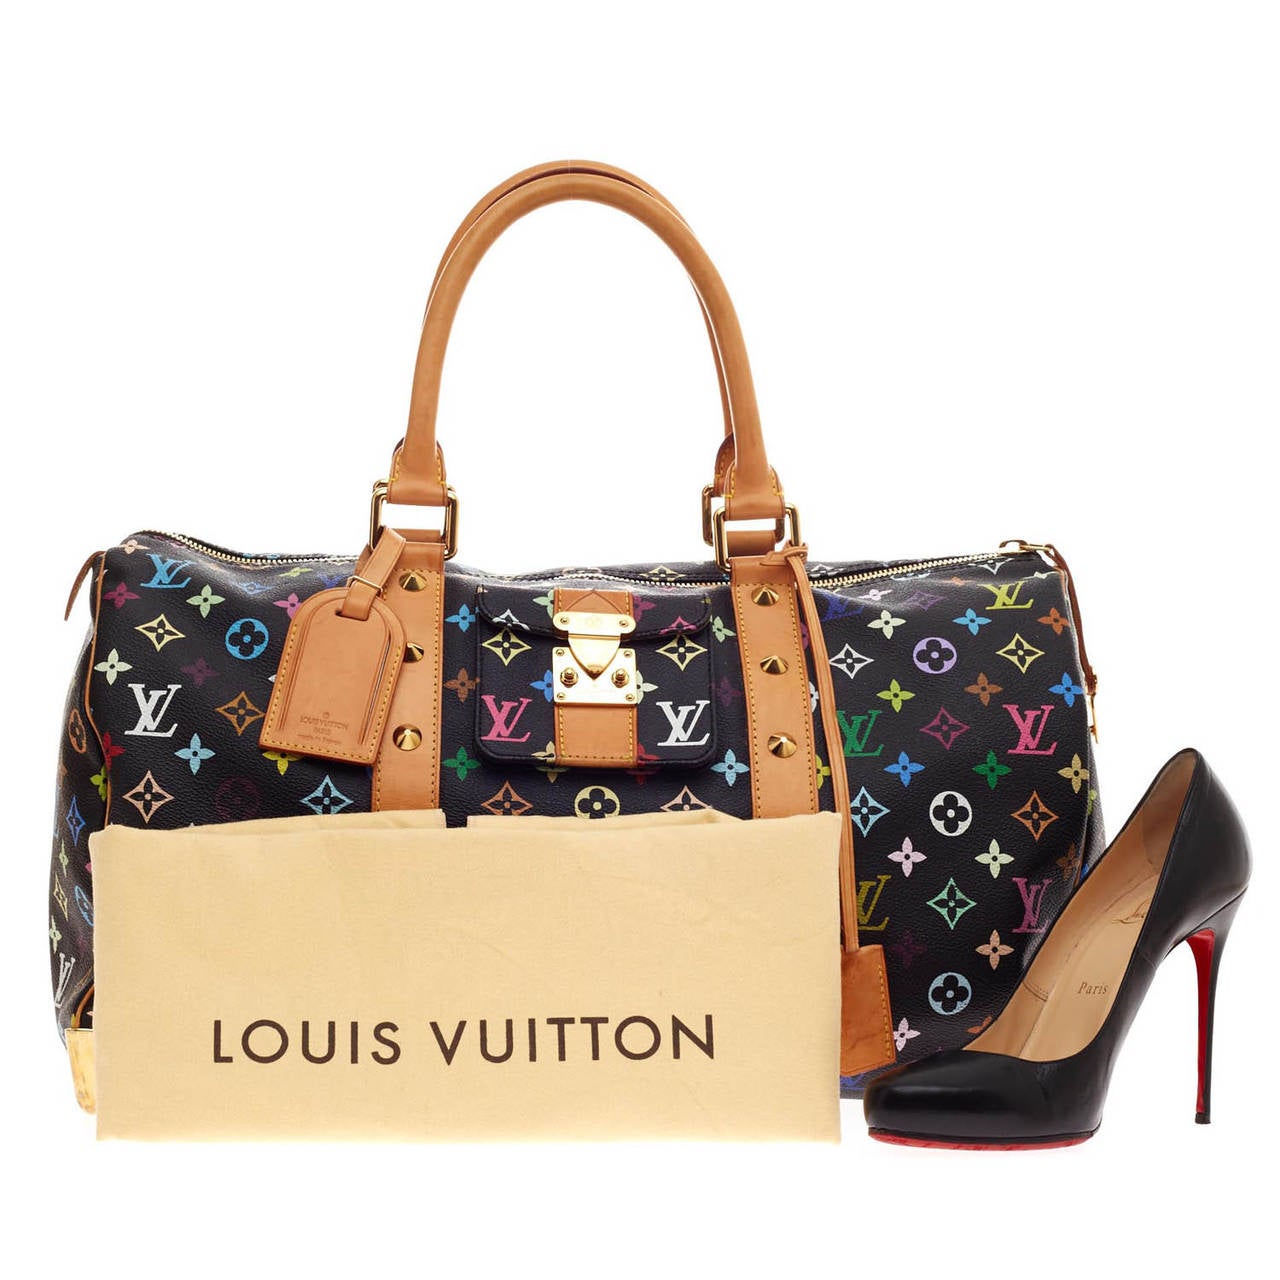 The Louis Vuitton Keepall Monogram Multicolor in size 45 is a vibrant and glamorous duffle perfect for traveling in style or for a weekend getaway. A beautiful reinterpretation of Louis Vuitton's classic monogram duffle, this bag features Takashi